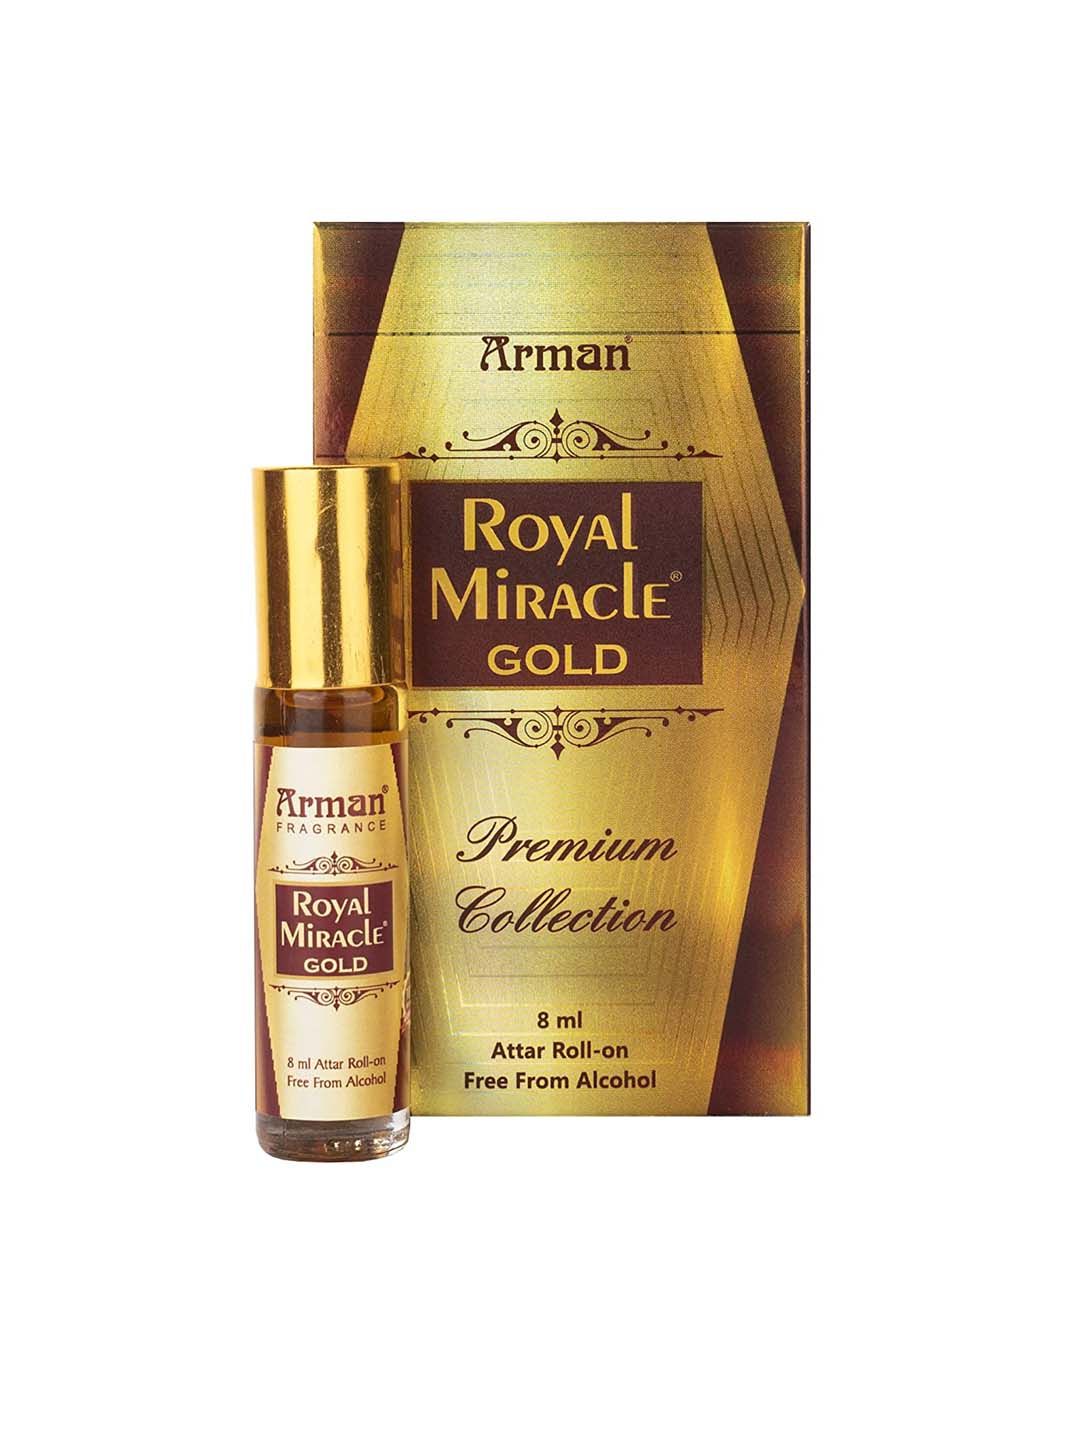 Arman Premium Collection Royal Miracle Gold Attar Roll On - 6 ml Price in India